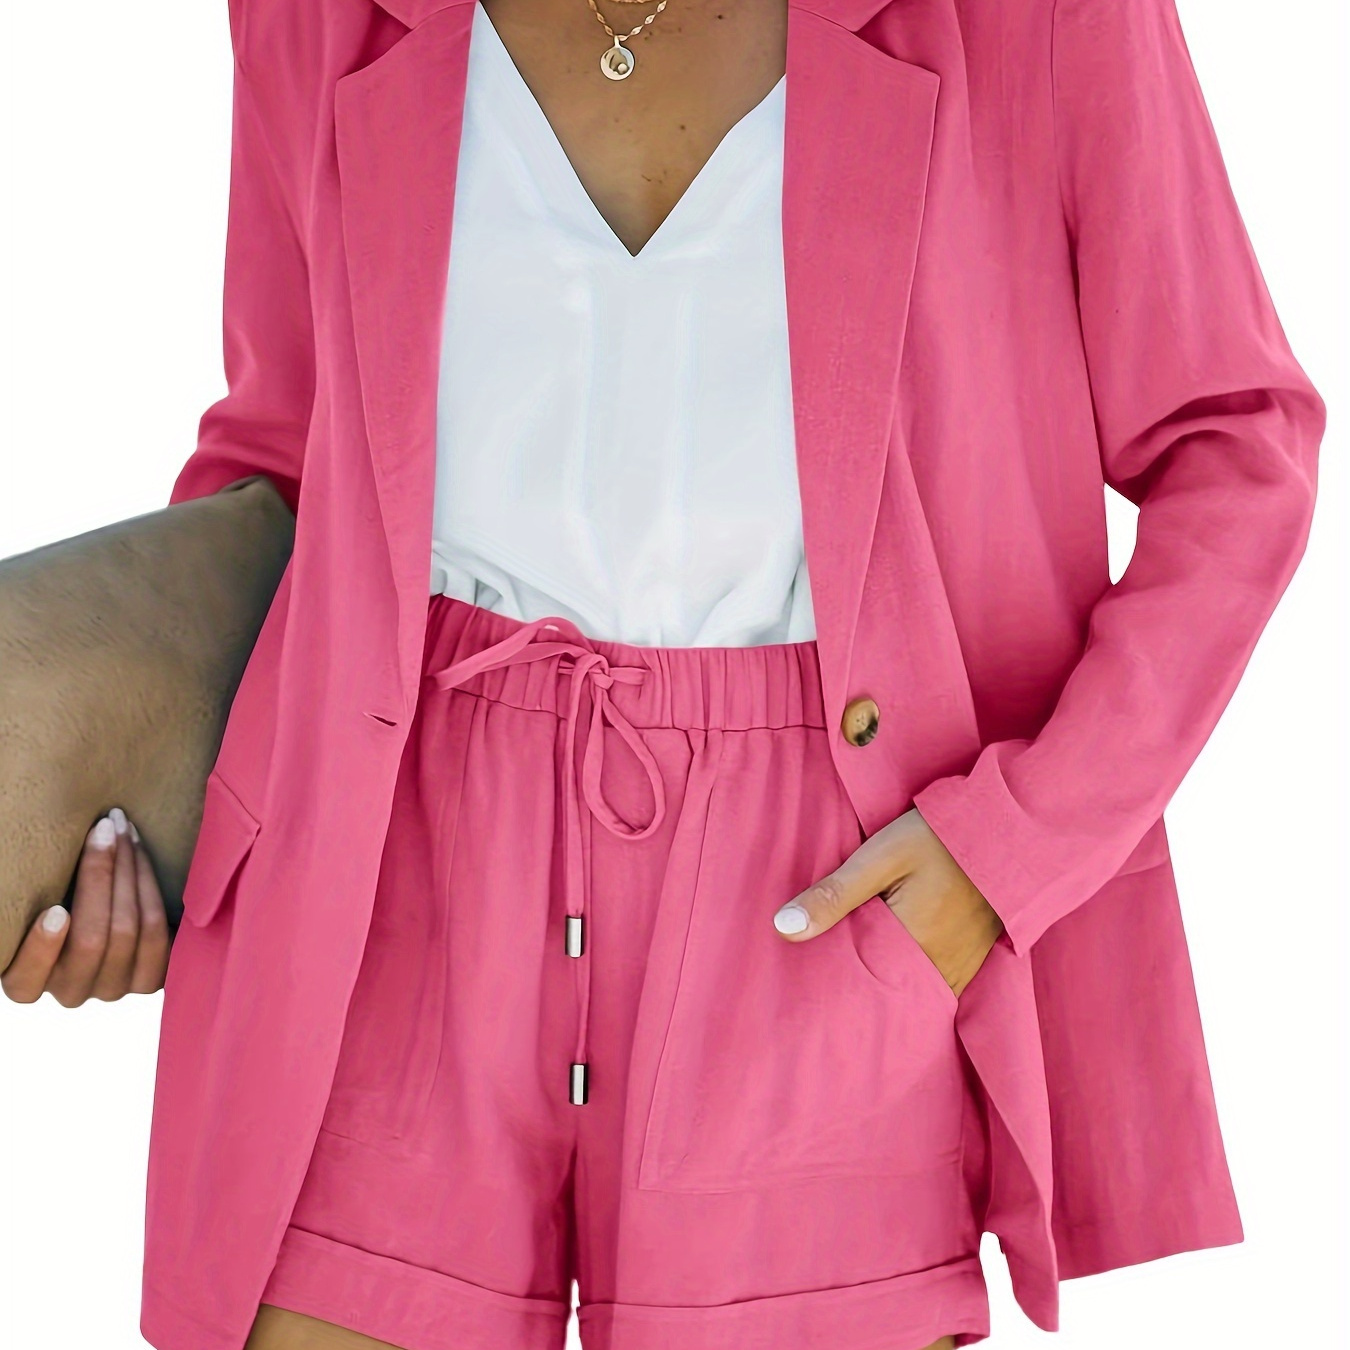 

Women's Business Suits Long Sleeve Blazer Jacket Coat And High Waisted Shorts 2 Pieces Outfits Set